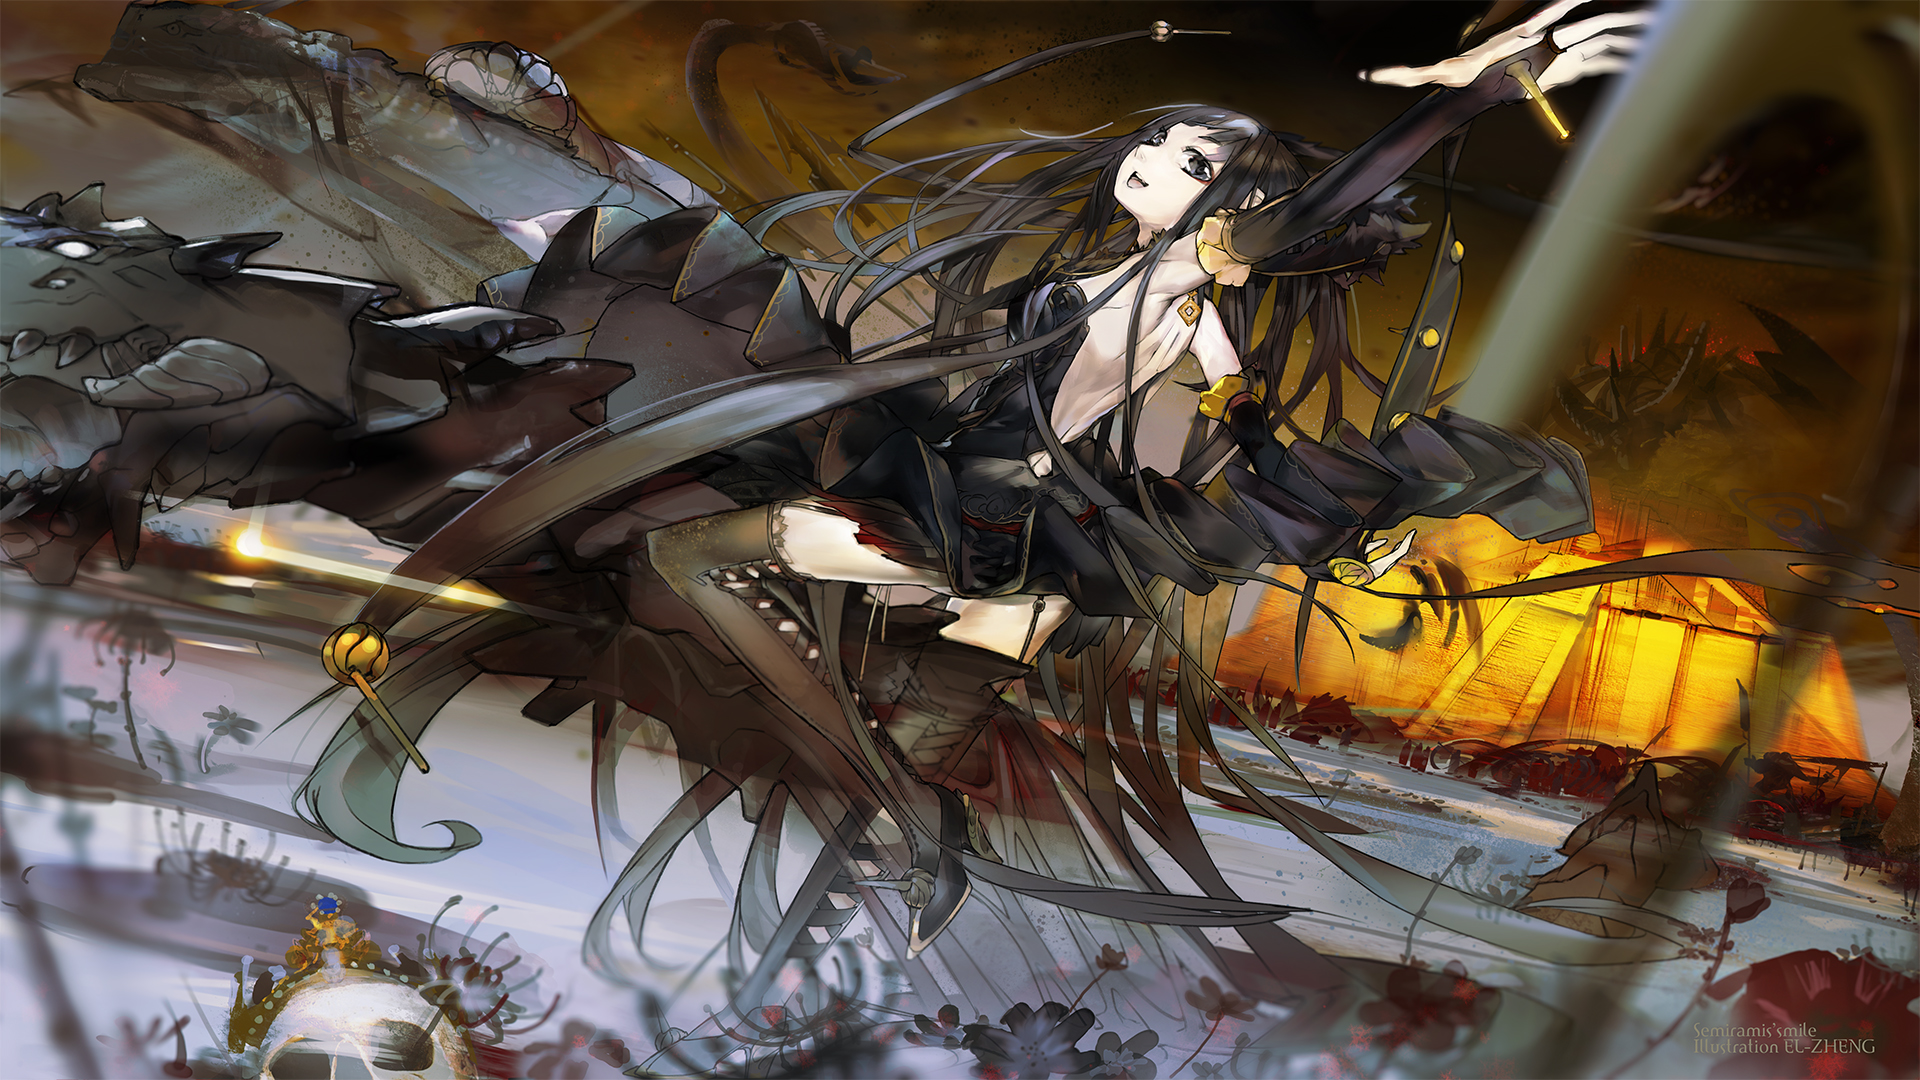 black hair dragon el zheng fate apocrypha fate stay night semiramis stockings thighhighs wallpapers hd desktop and mobile backgrounds black hair dragon el zheng fate